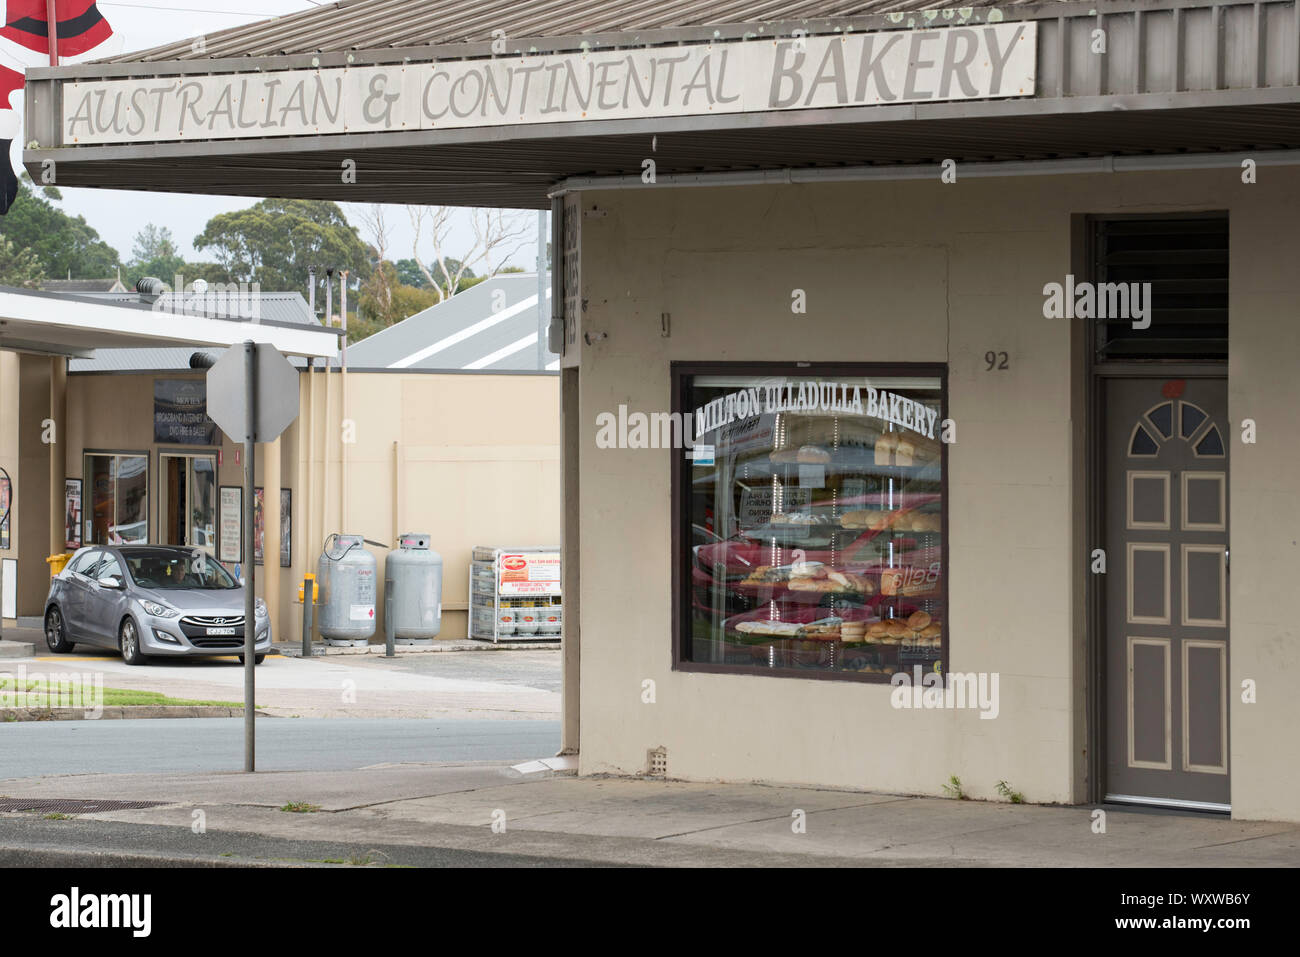 The Milton Ulladulla Bakery (patisserie) on the corner of Church Street and the Princes Highway in Milton, New South Wales, Australia Stock Photo